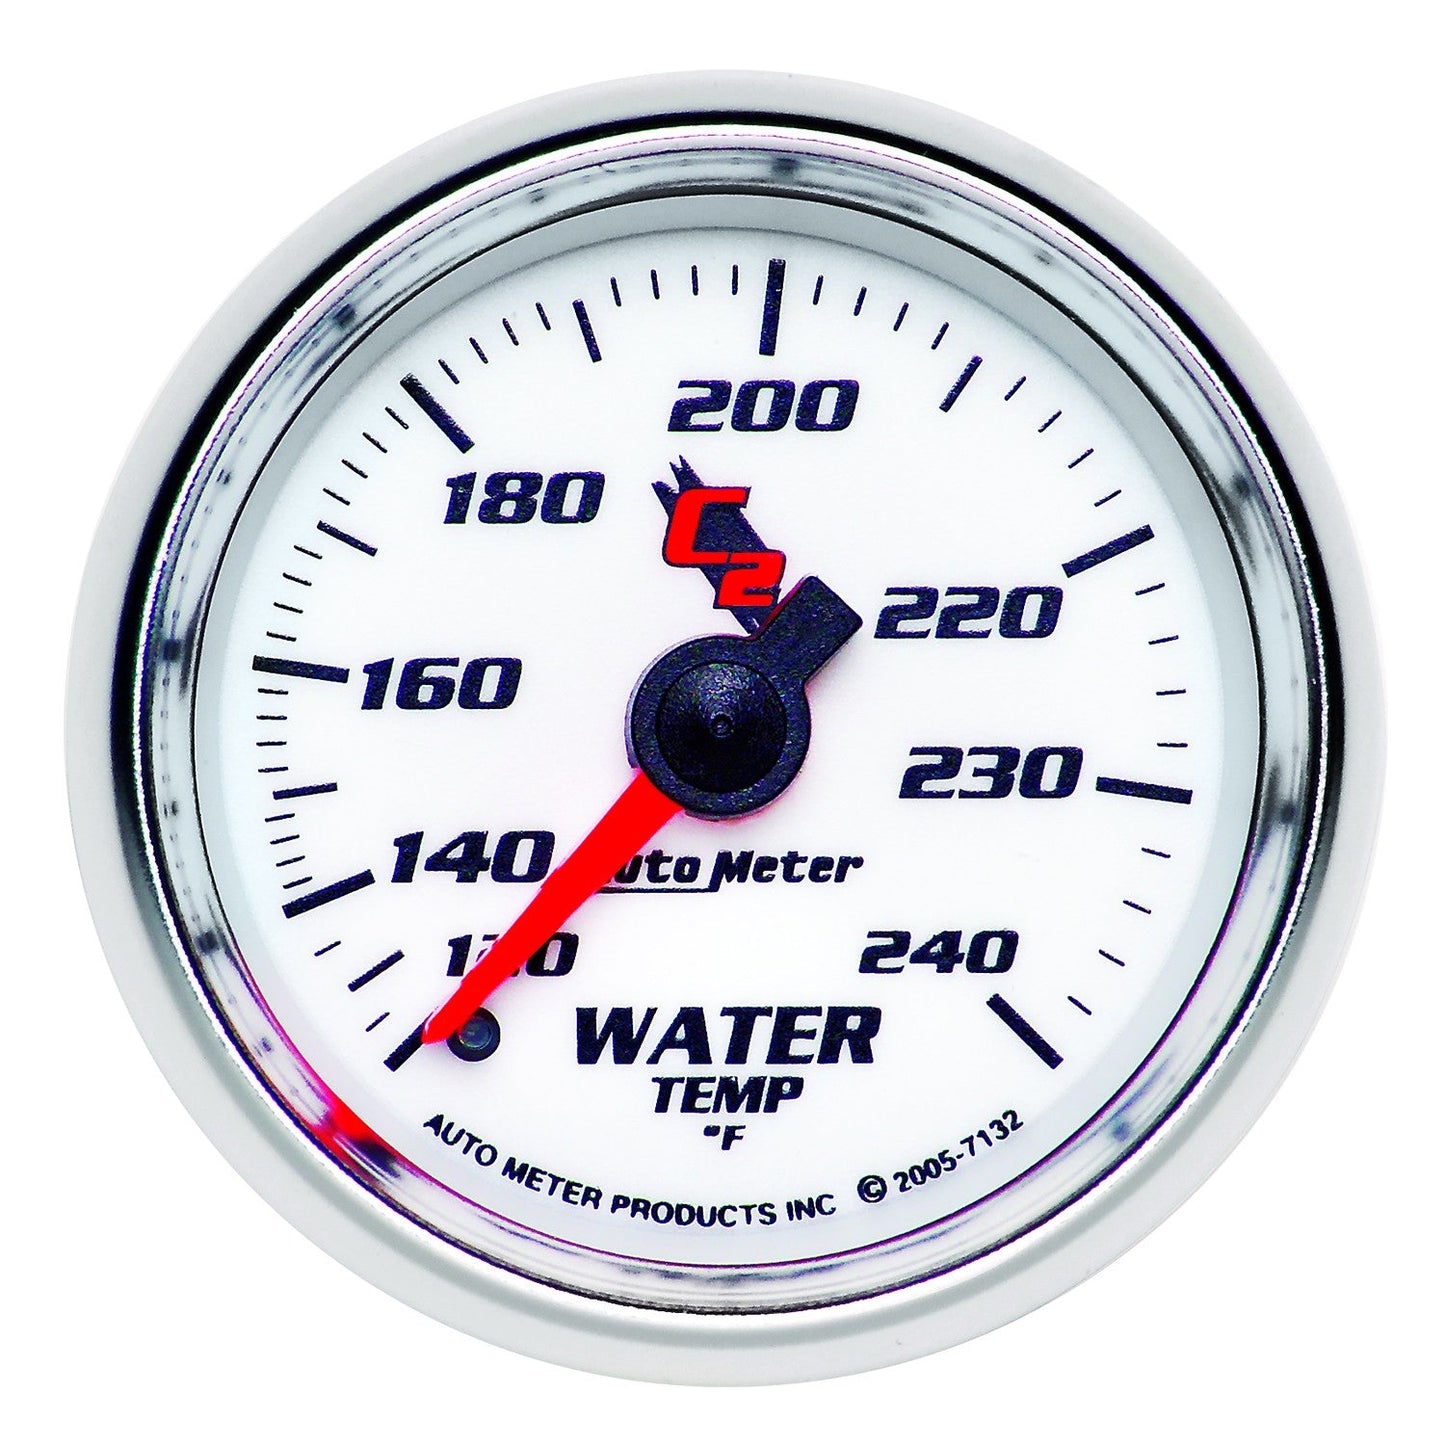 AutoMeter - 2-1/16" WATER TEMPERATURE, 120-240 °F, 6 FT., MECHANICAL, C2 (7132)